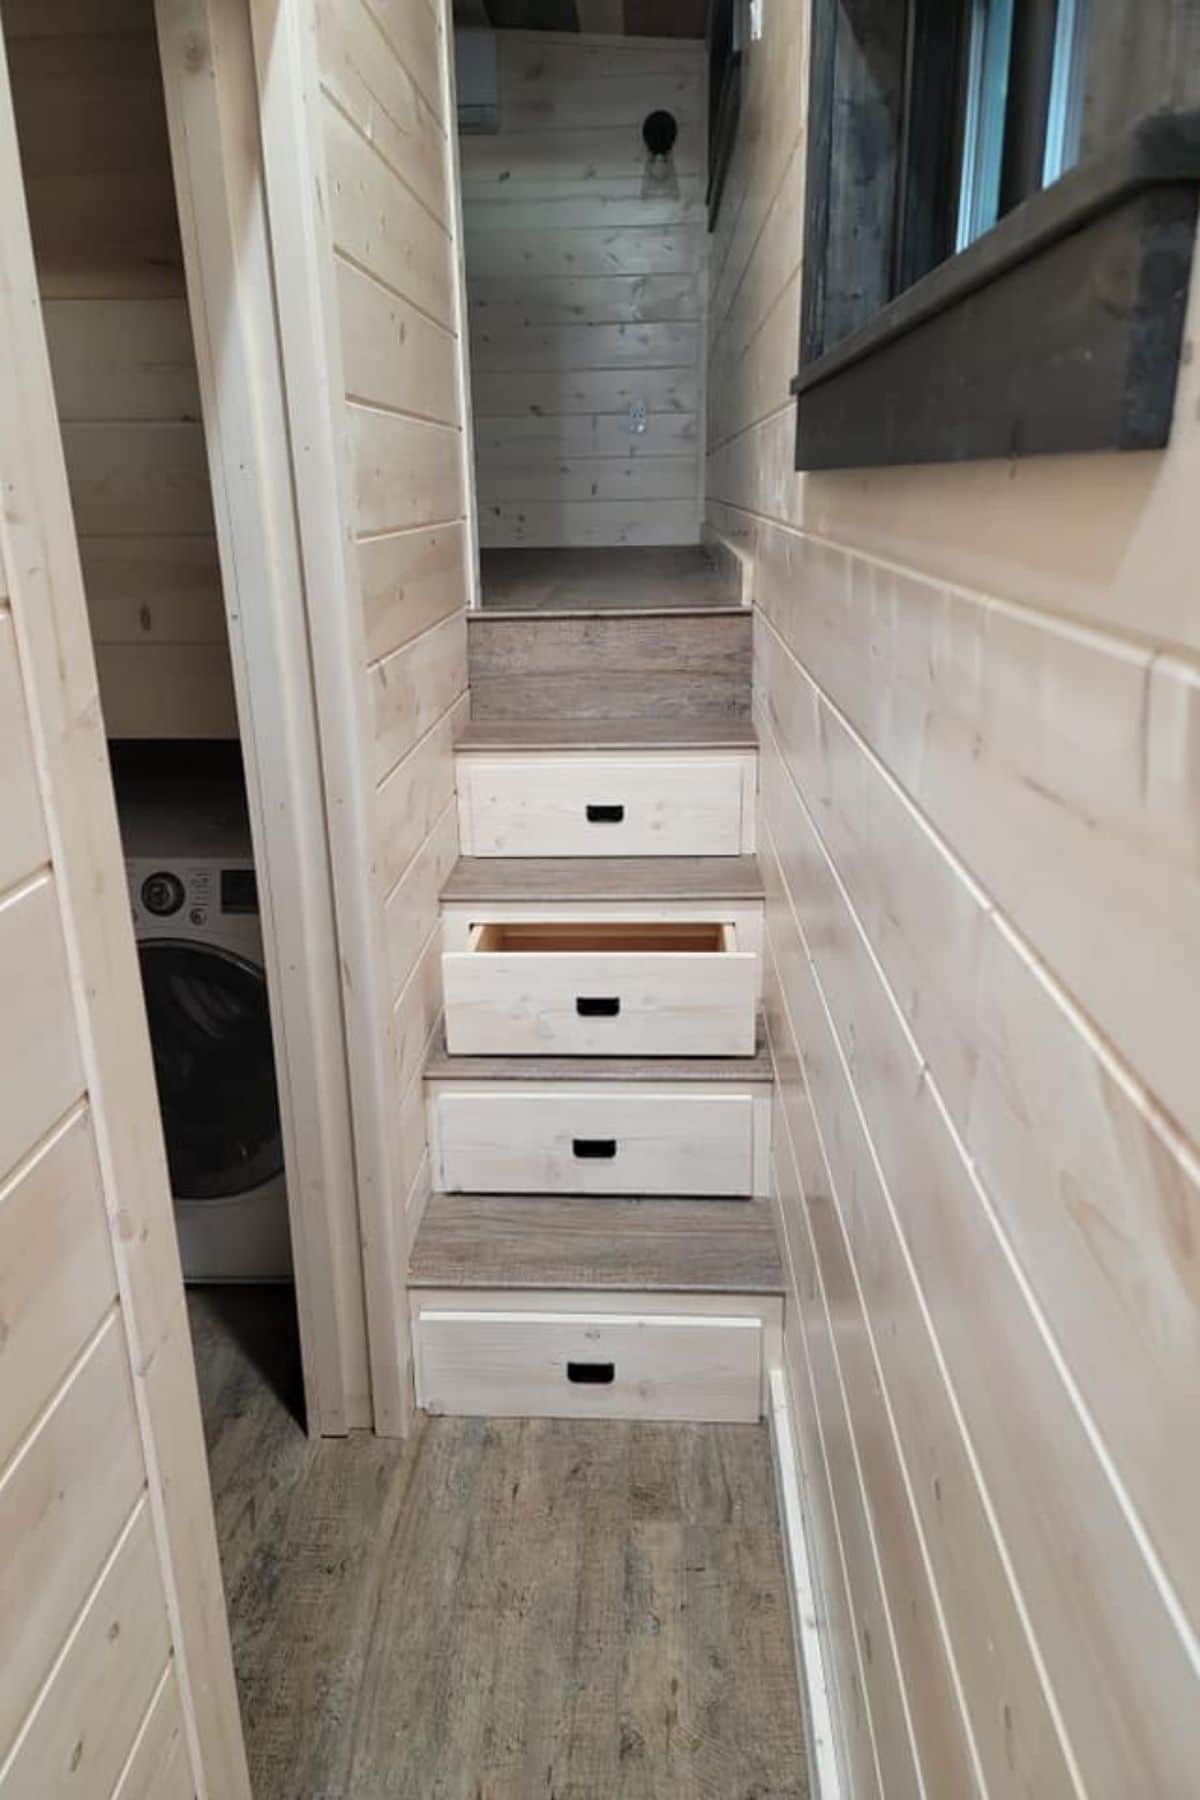 stairs to loft bedroom with drawers beneath stairs